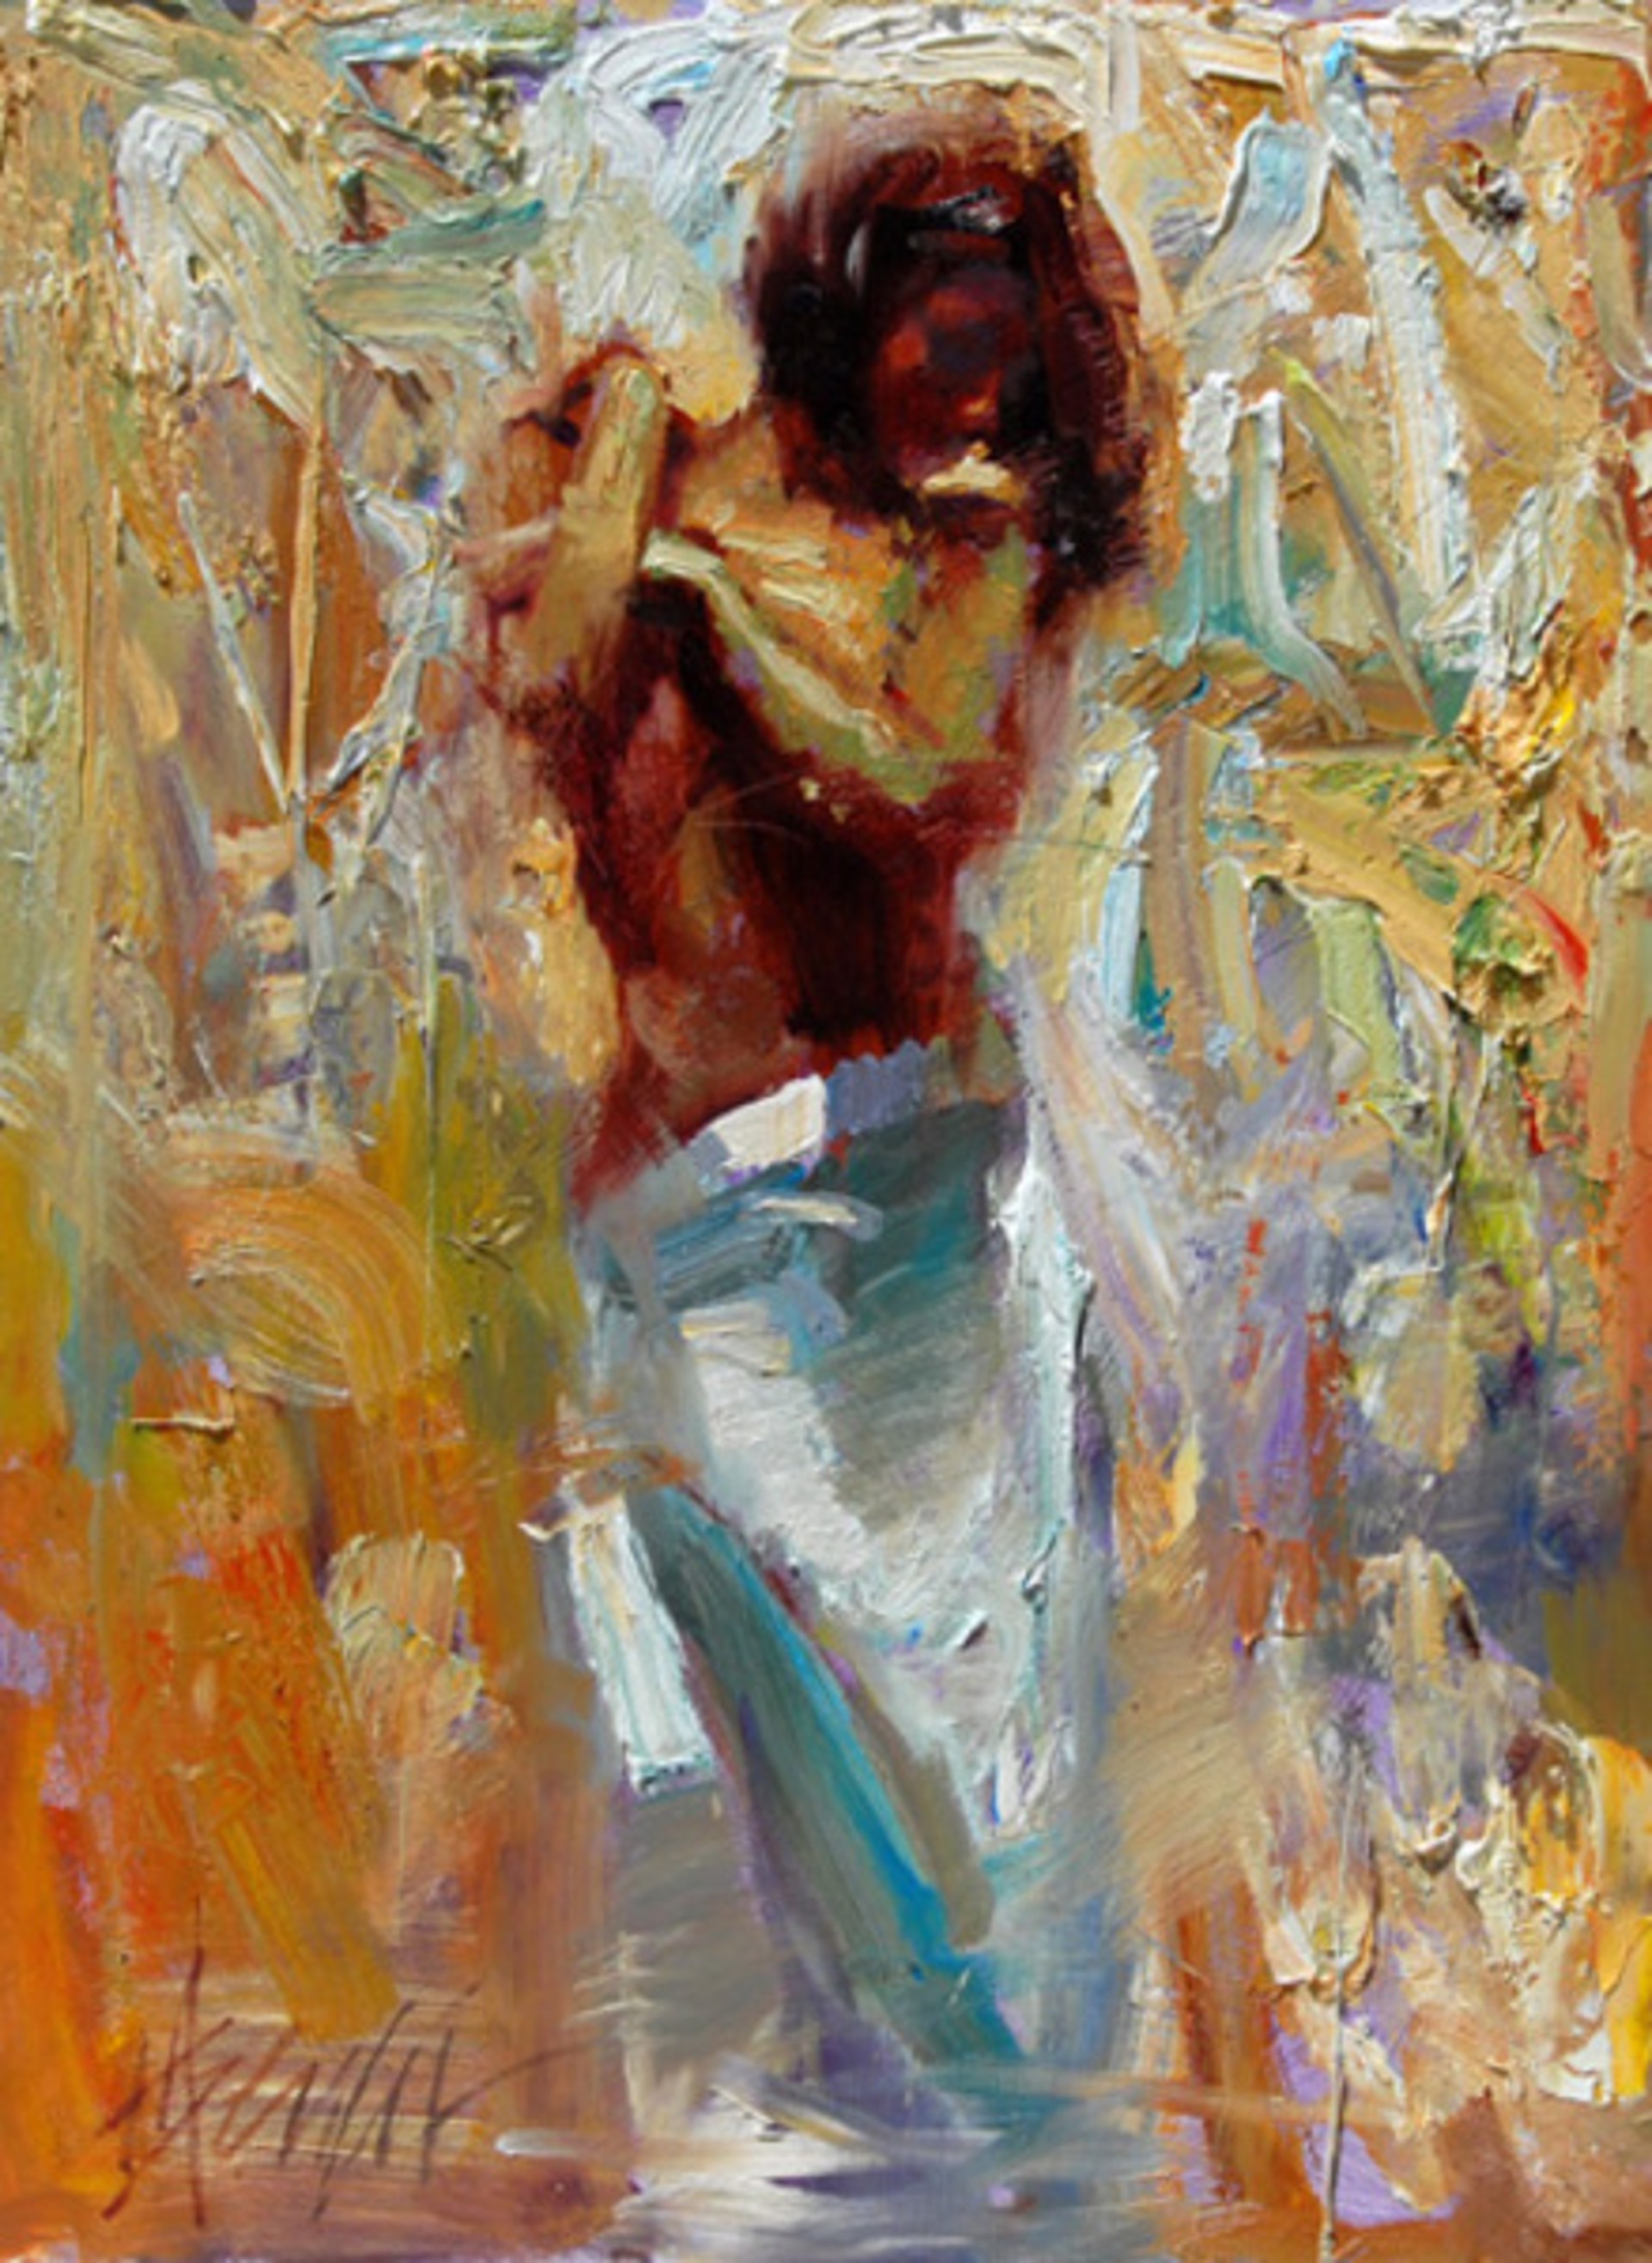 Transition by Henry Asencio